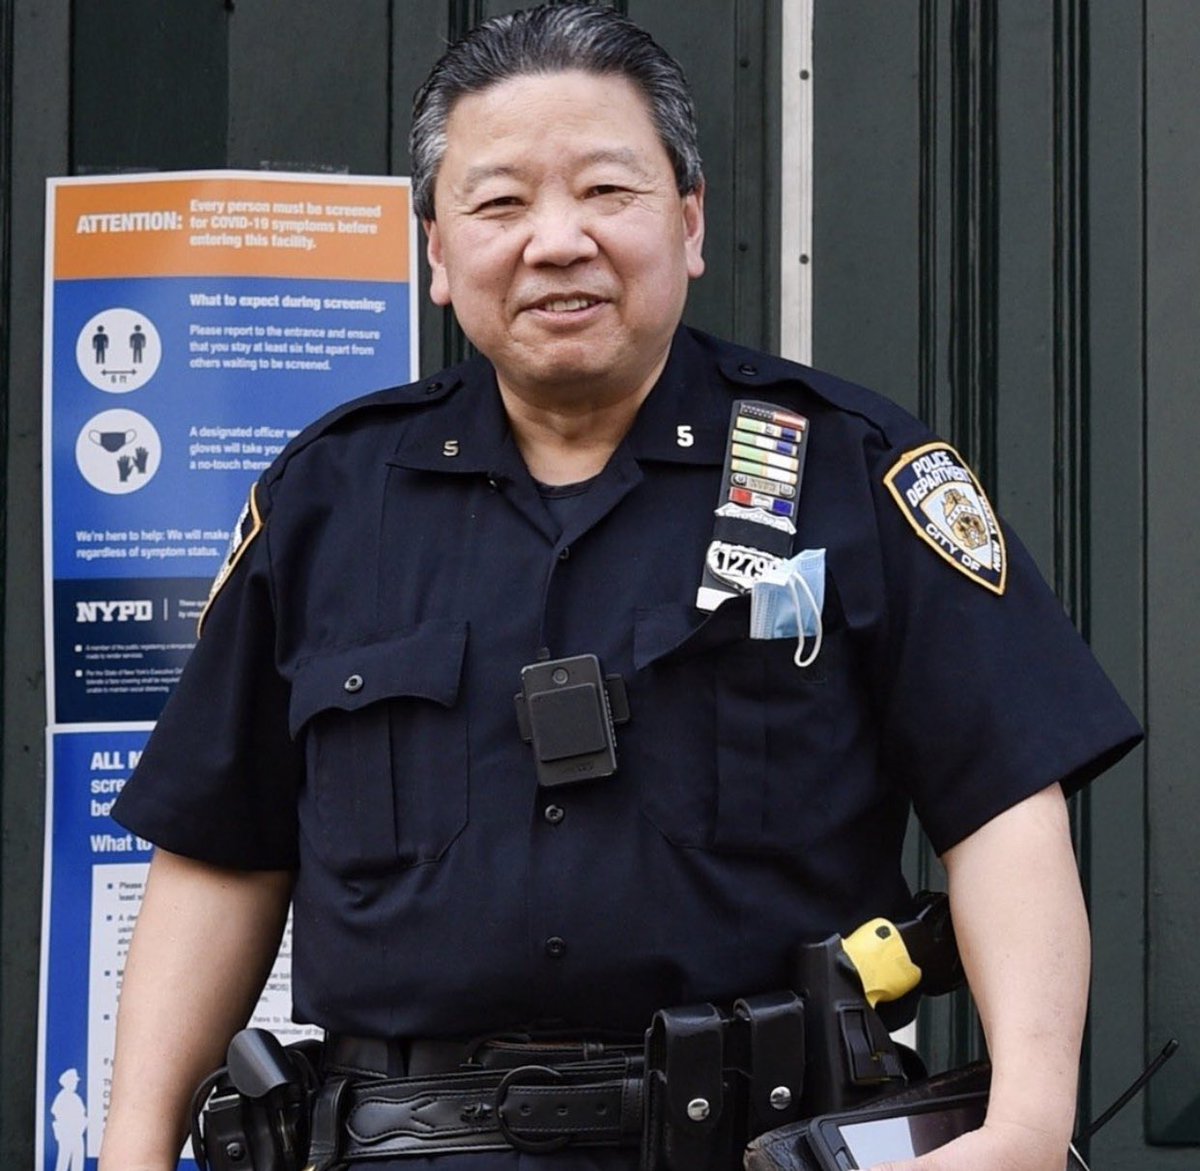 58-year-old officer Ming Lee has been patrolling the same 5th precinct neighborhood in NY for 37 years! He continued working on the frontlines through the coronavirus pandemic, keeping NYers safe.  #BacktheBlue